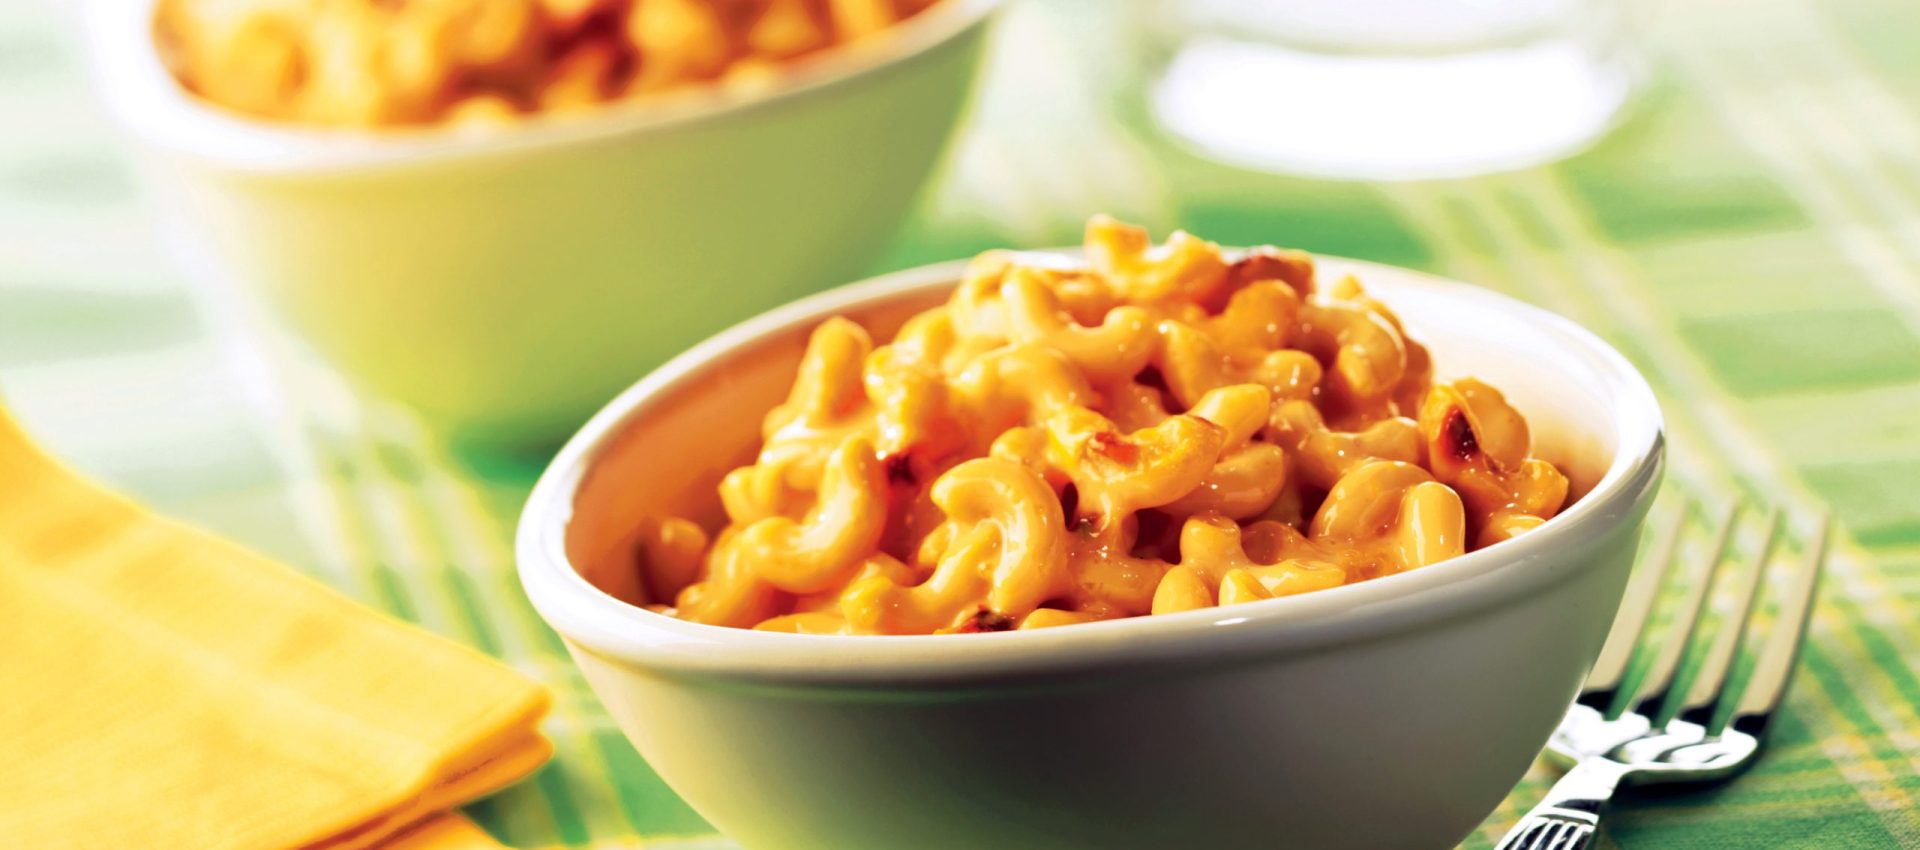 baked-mac-and-cheese-scaled-1920x850 Baked Mac and Cheese